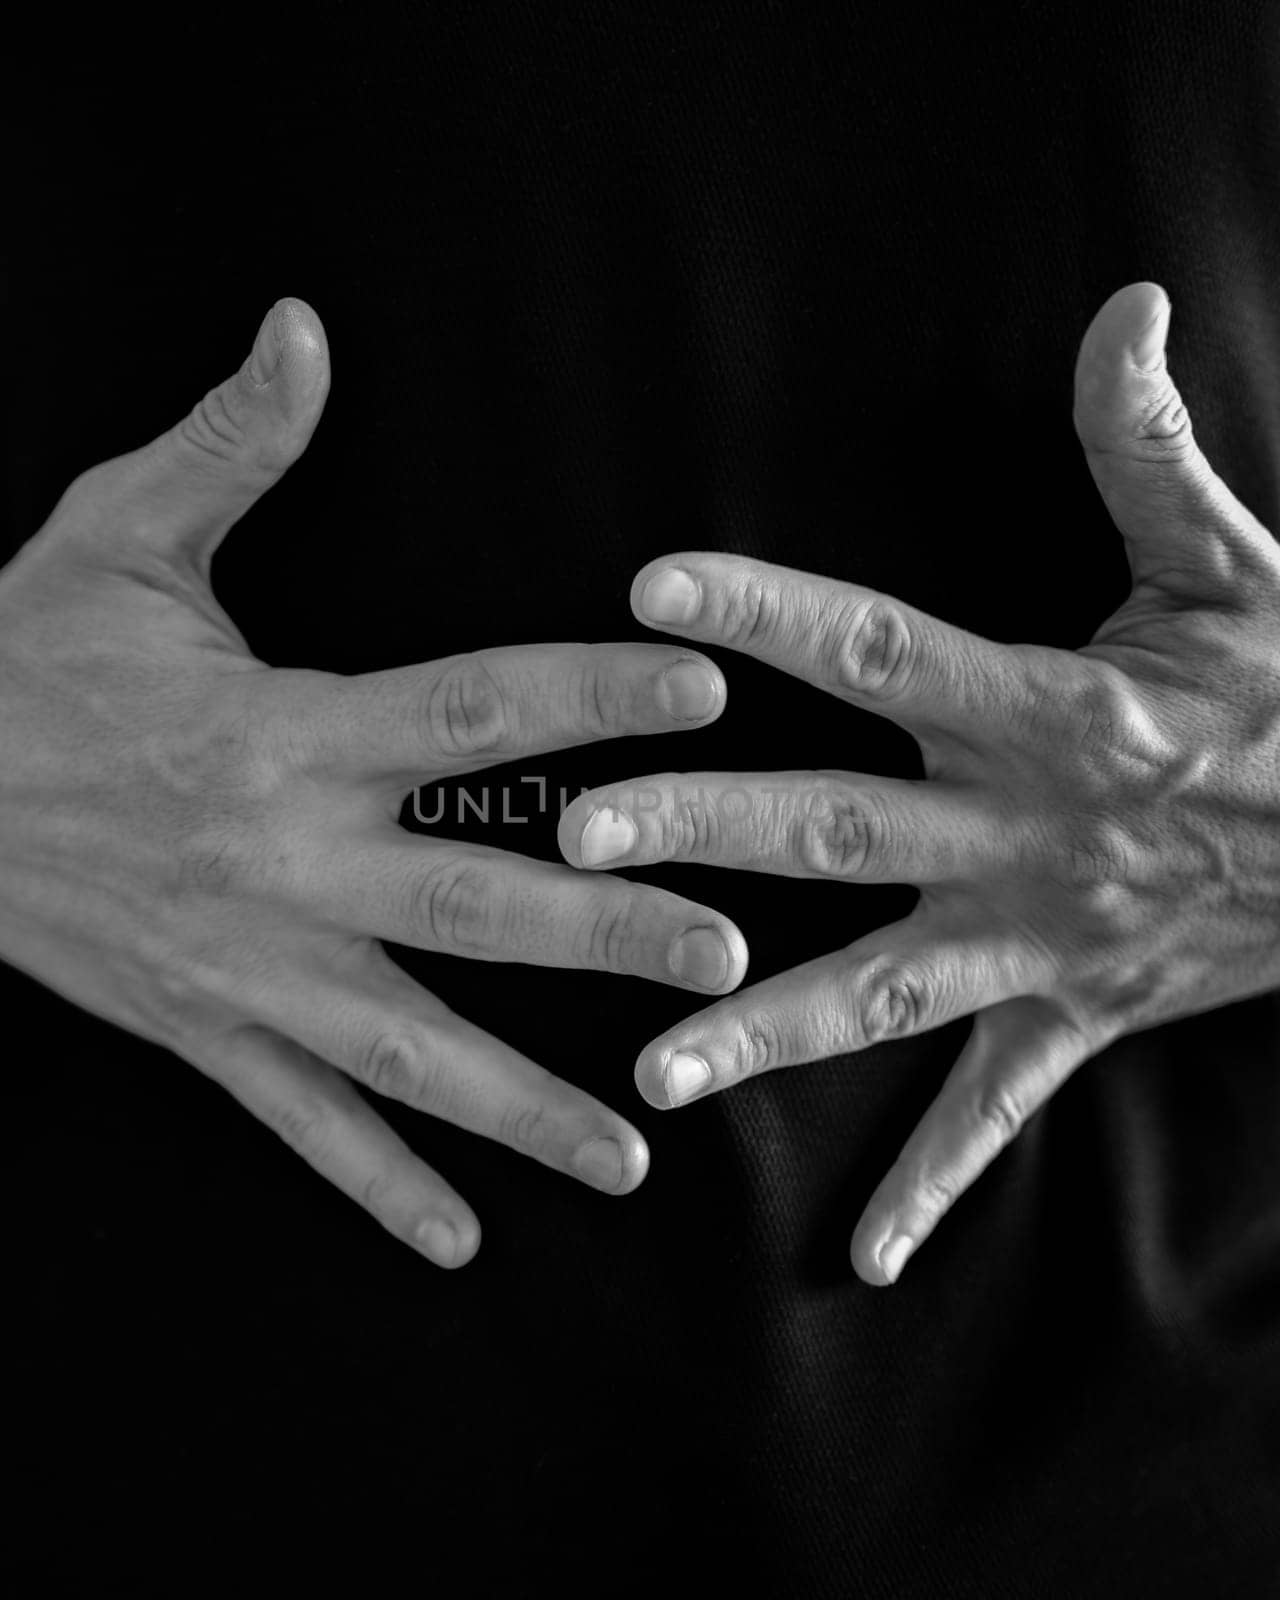 Overlapping hands creating an intricate pattern against a black textile backdrop